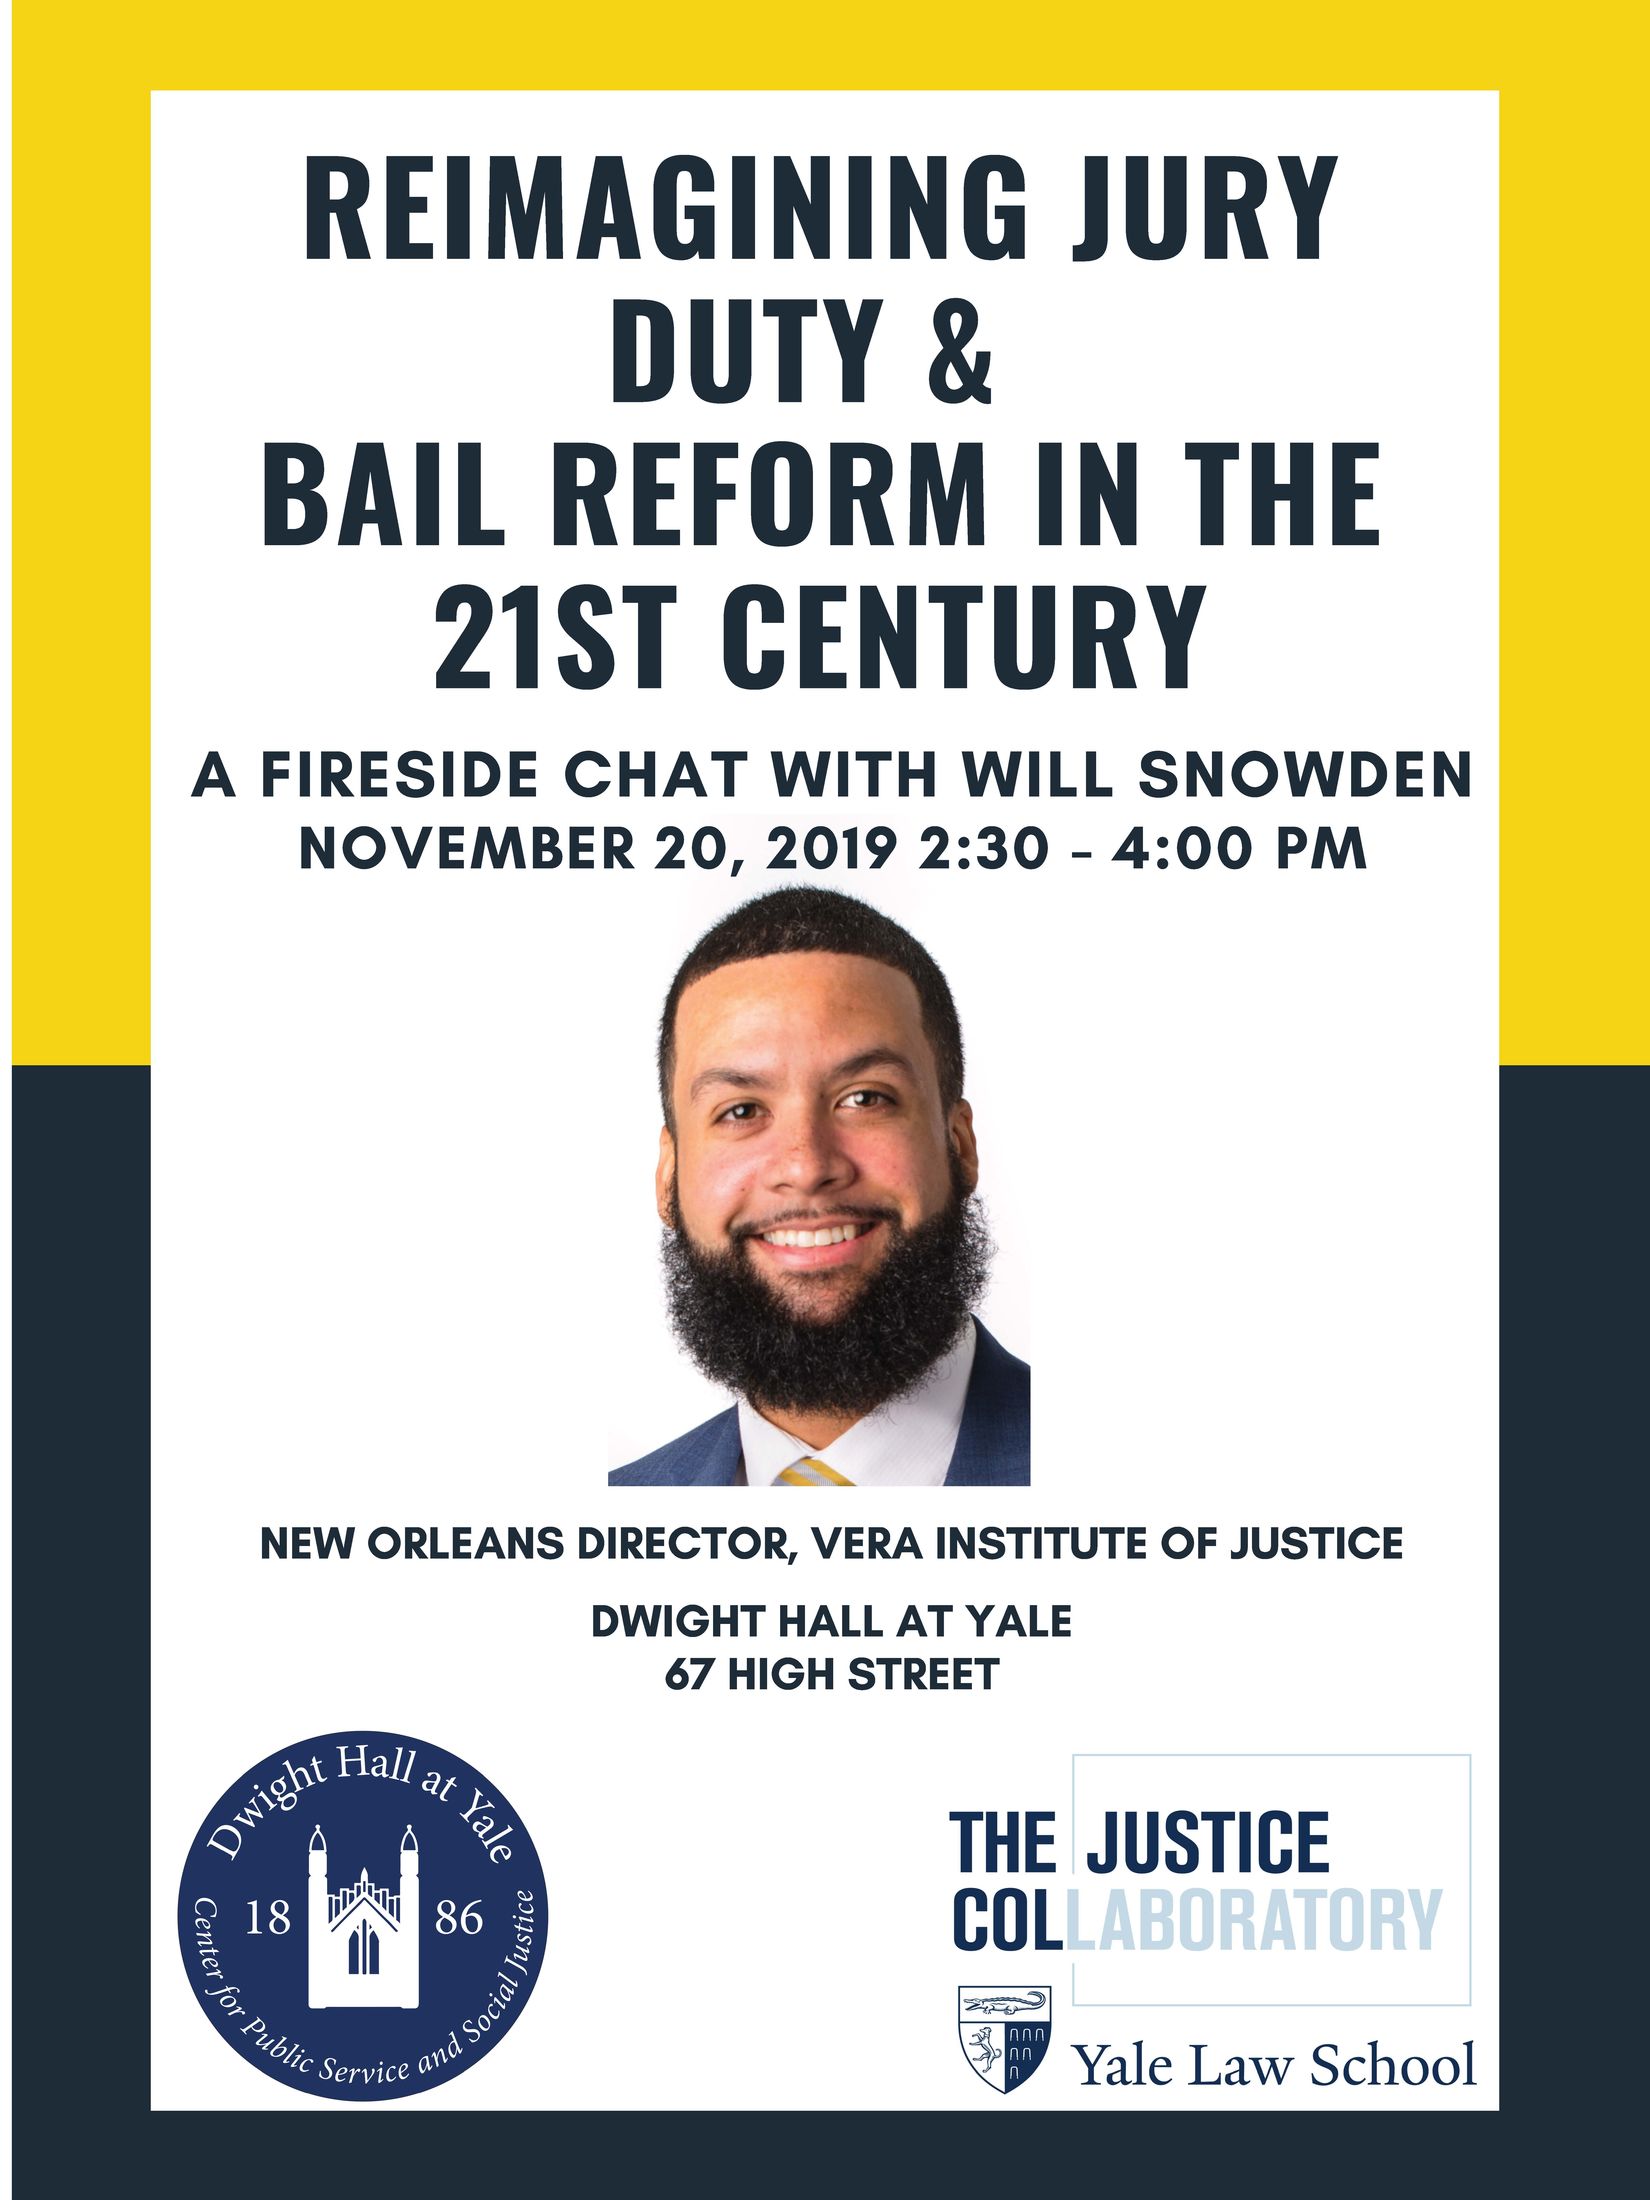 yale law school justice collaboratory